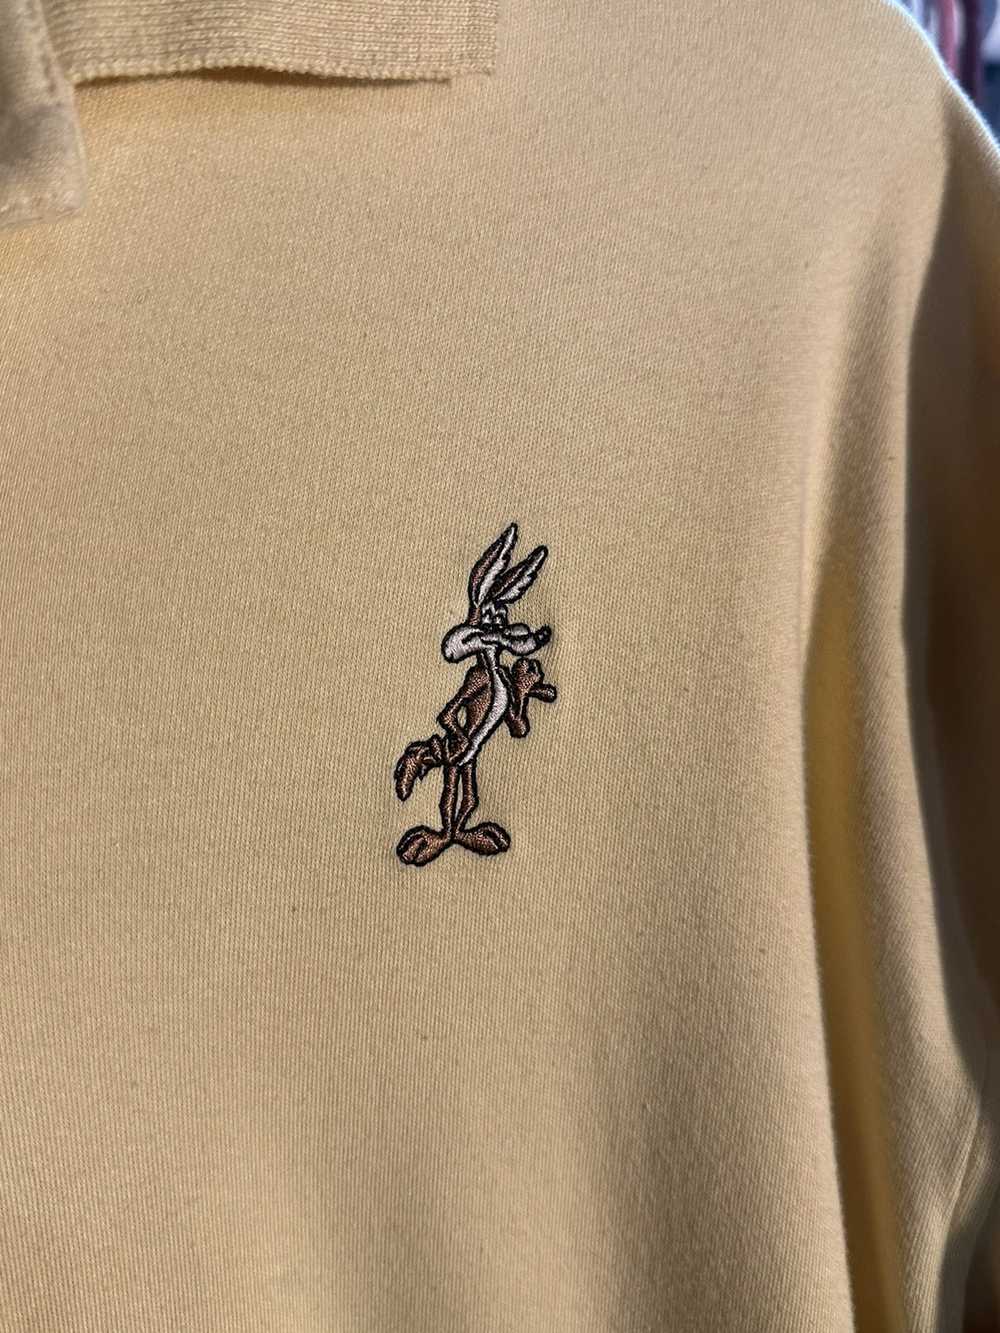 Vintage looney toons polo - image 2